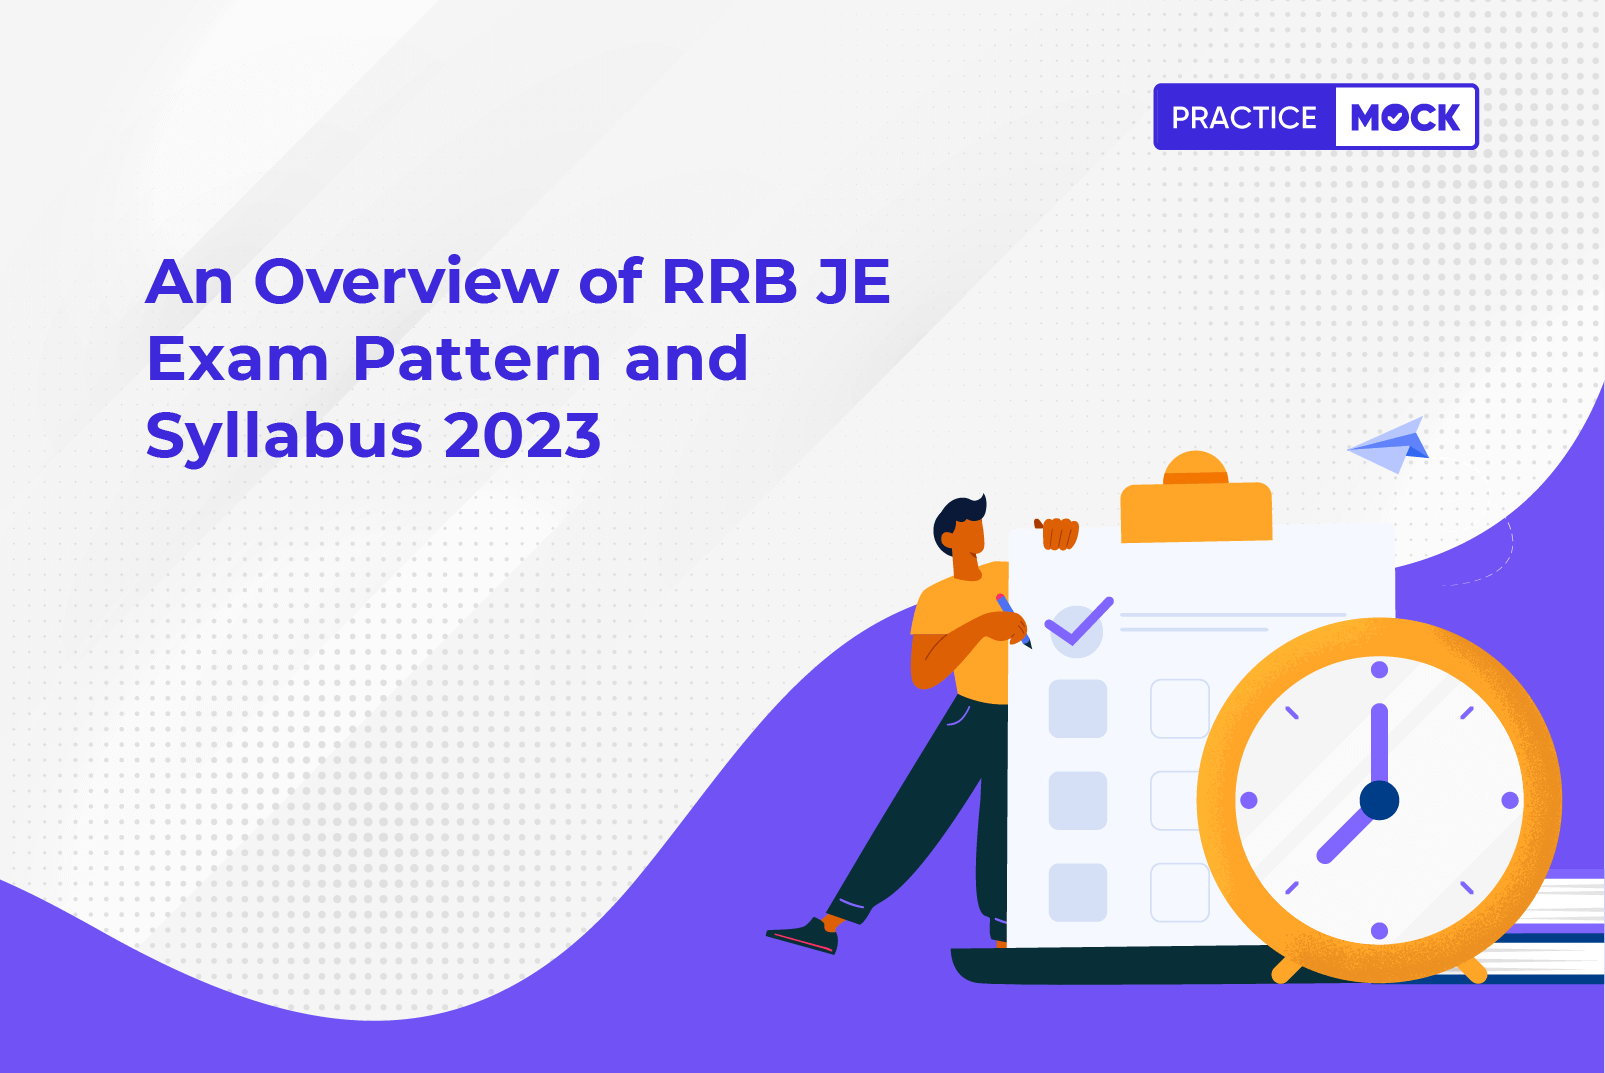 an-overview-of-rrb-je-exam-pattern-and-syllabus-2023-practicemock